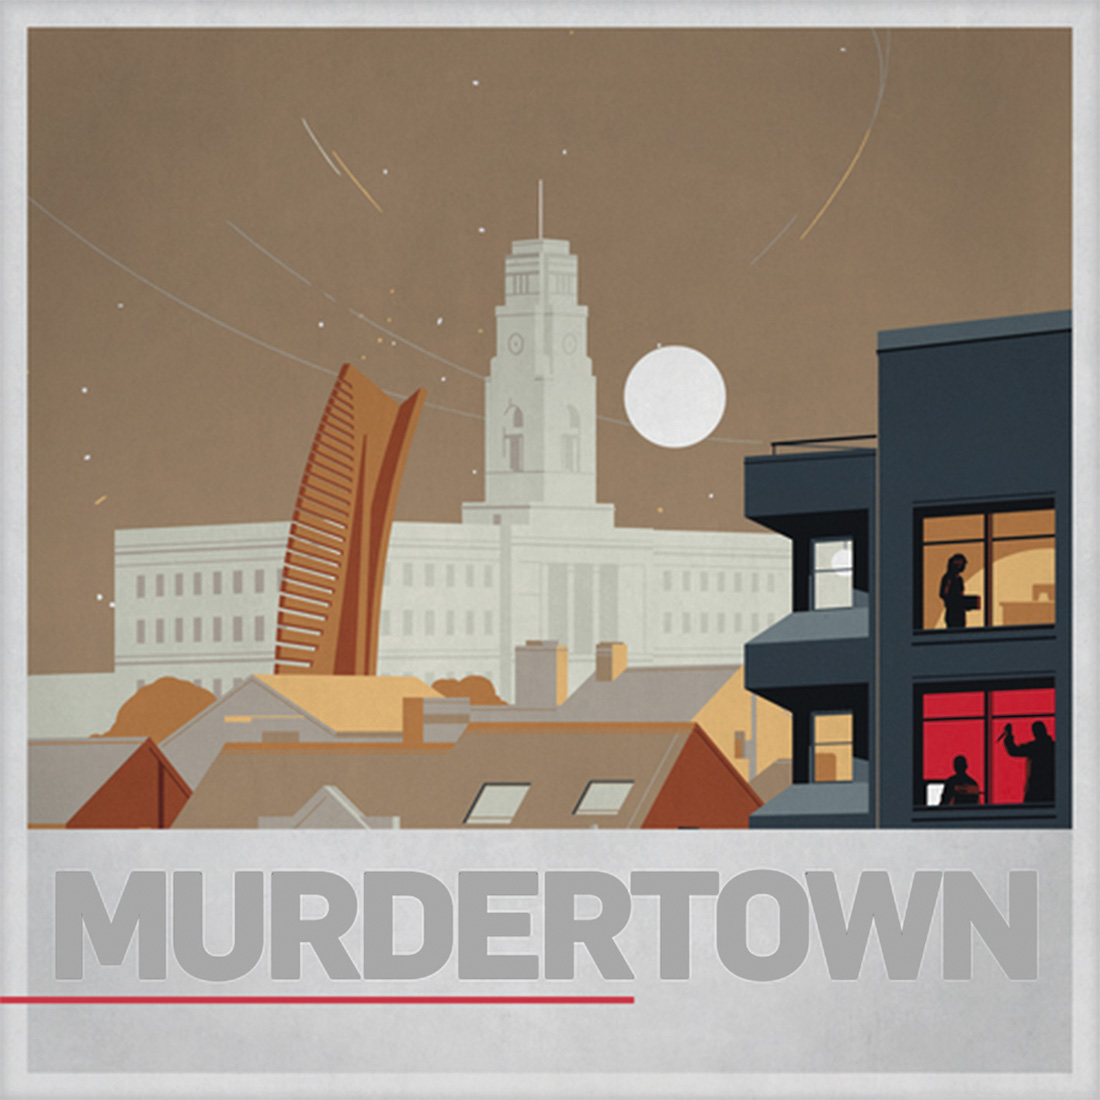 C+I’s most popular original show, Murdertown featuring Barnsley (Credit: A&E Networks)